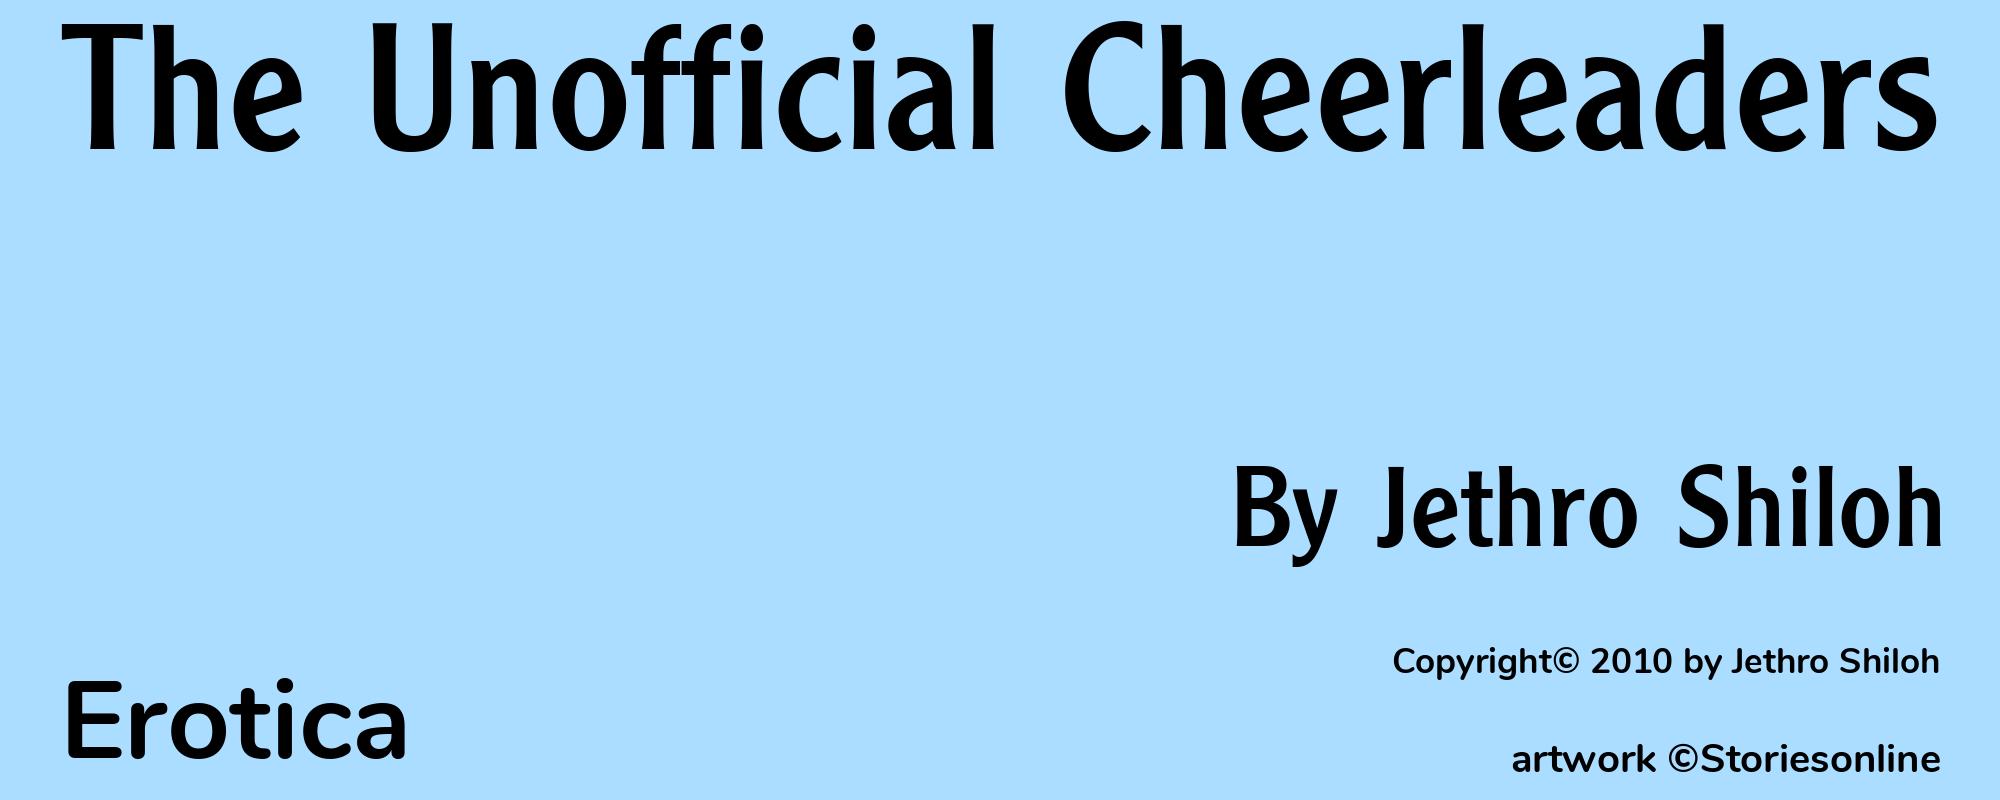 The Unofficial Cheerleaders - Cover